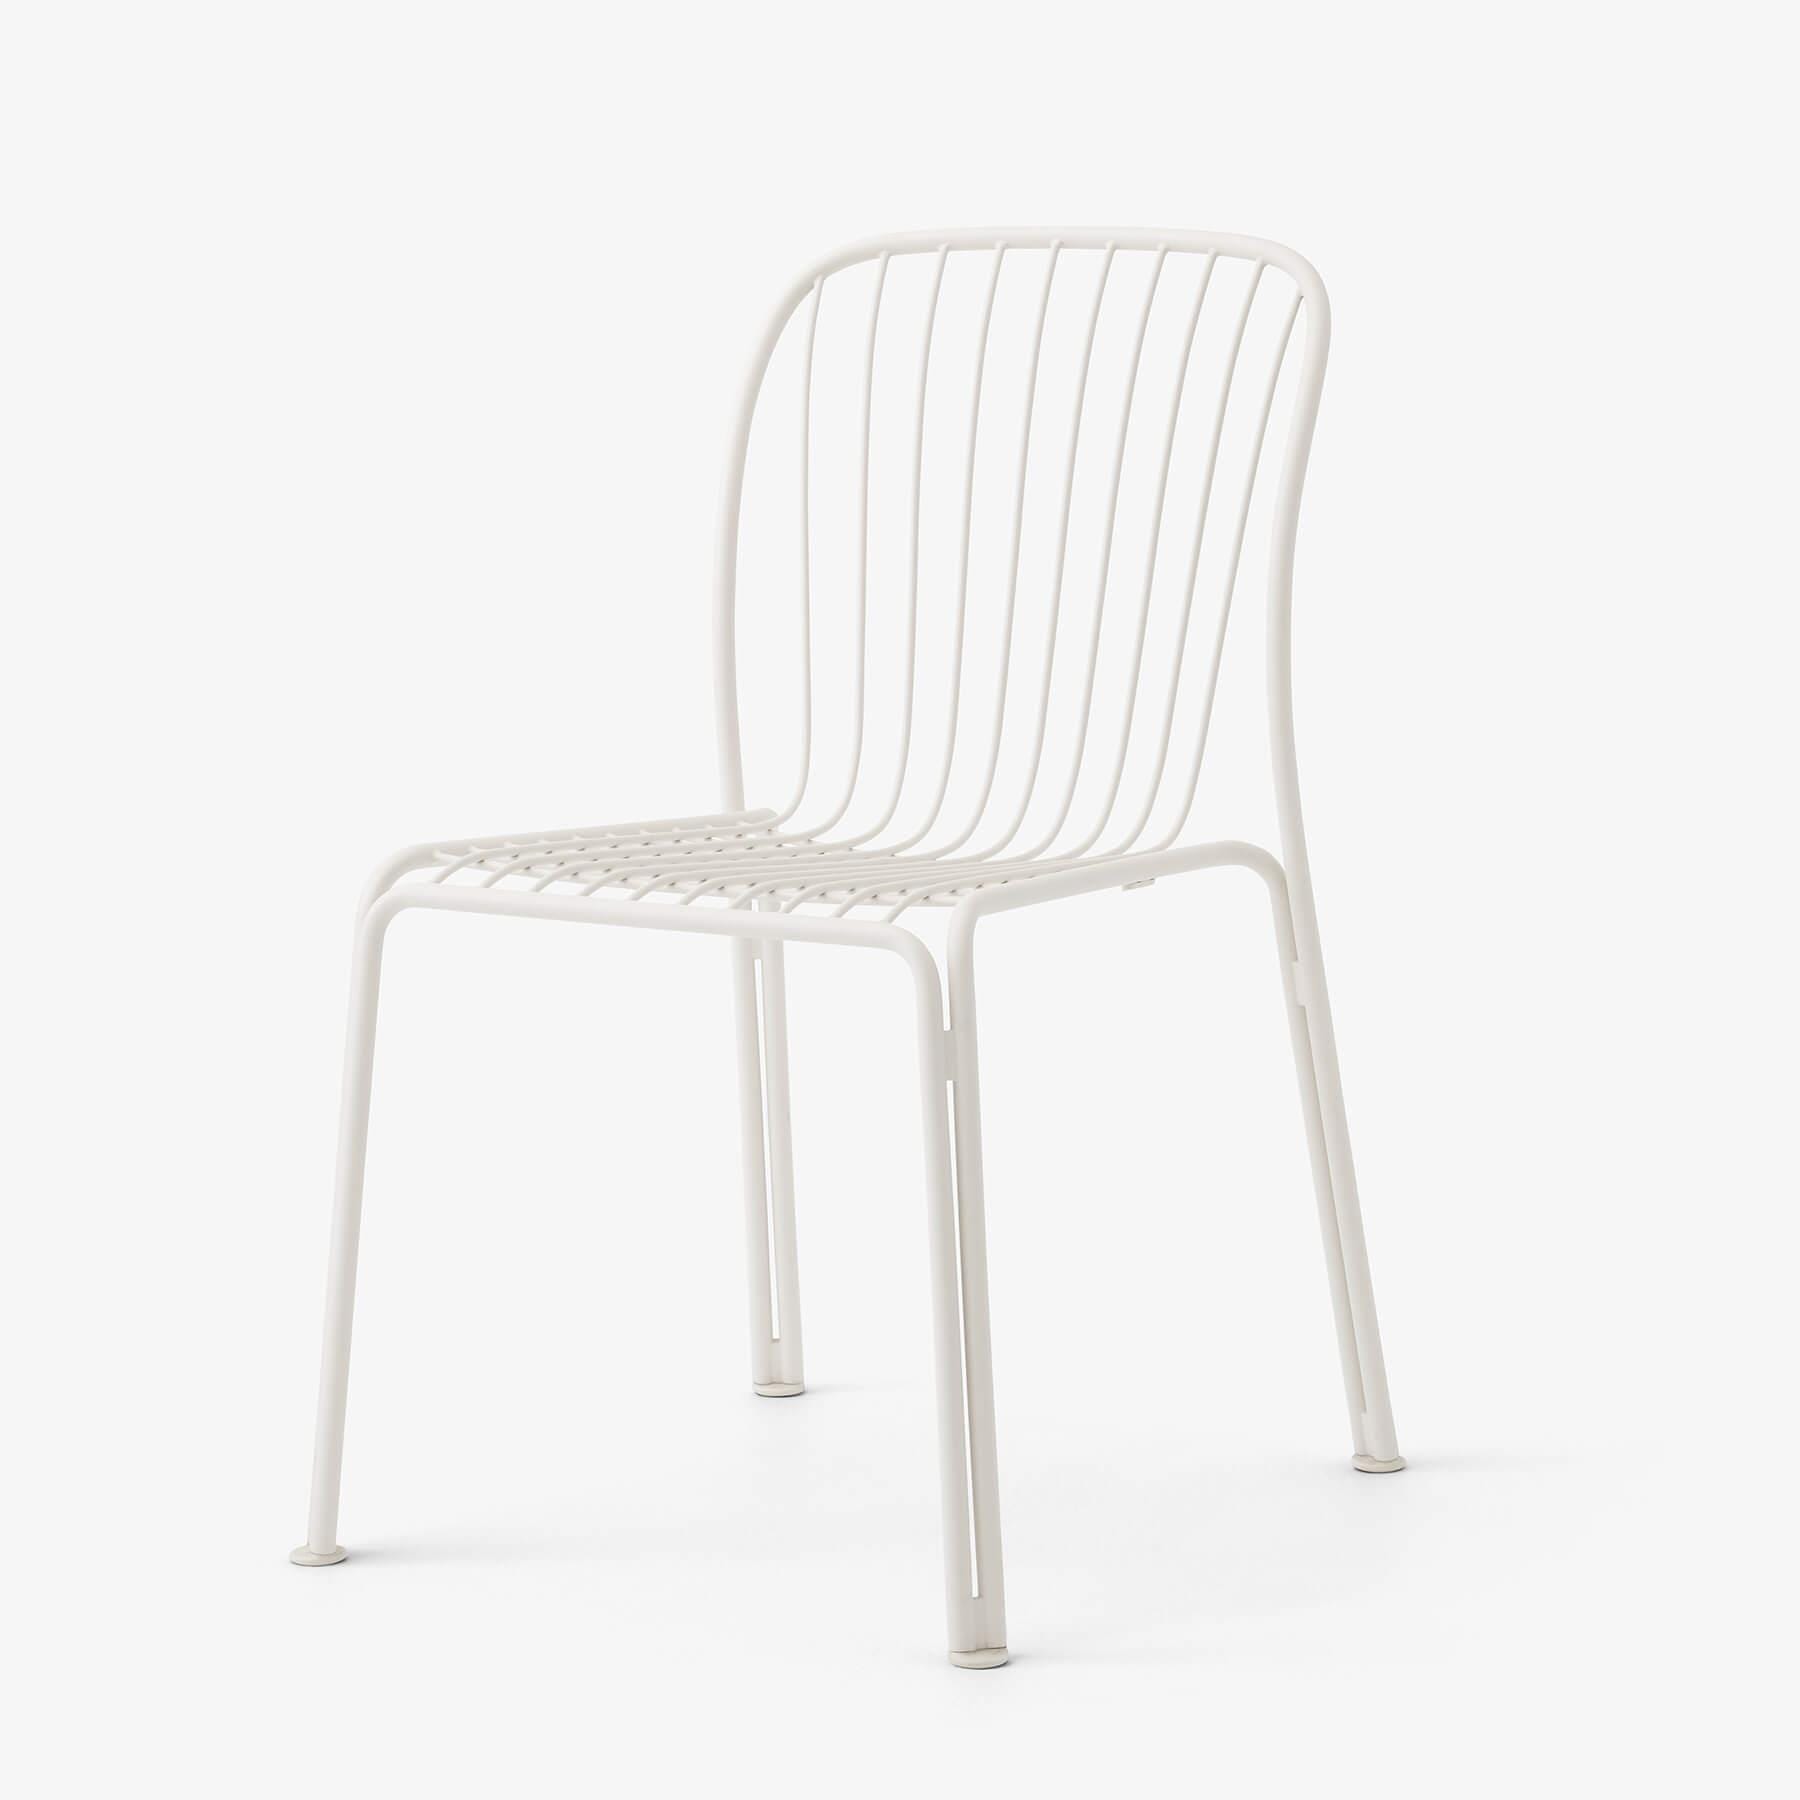 Tradition Thorvald Sc94 Outdoor Chair Ivory White